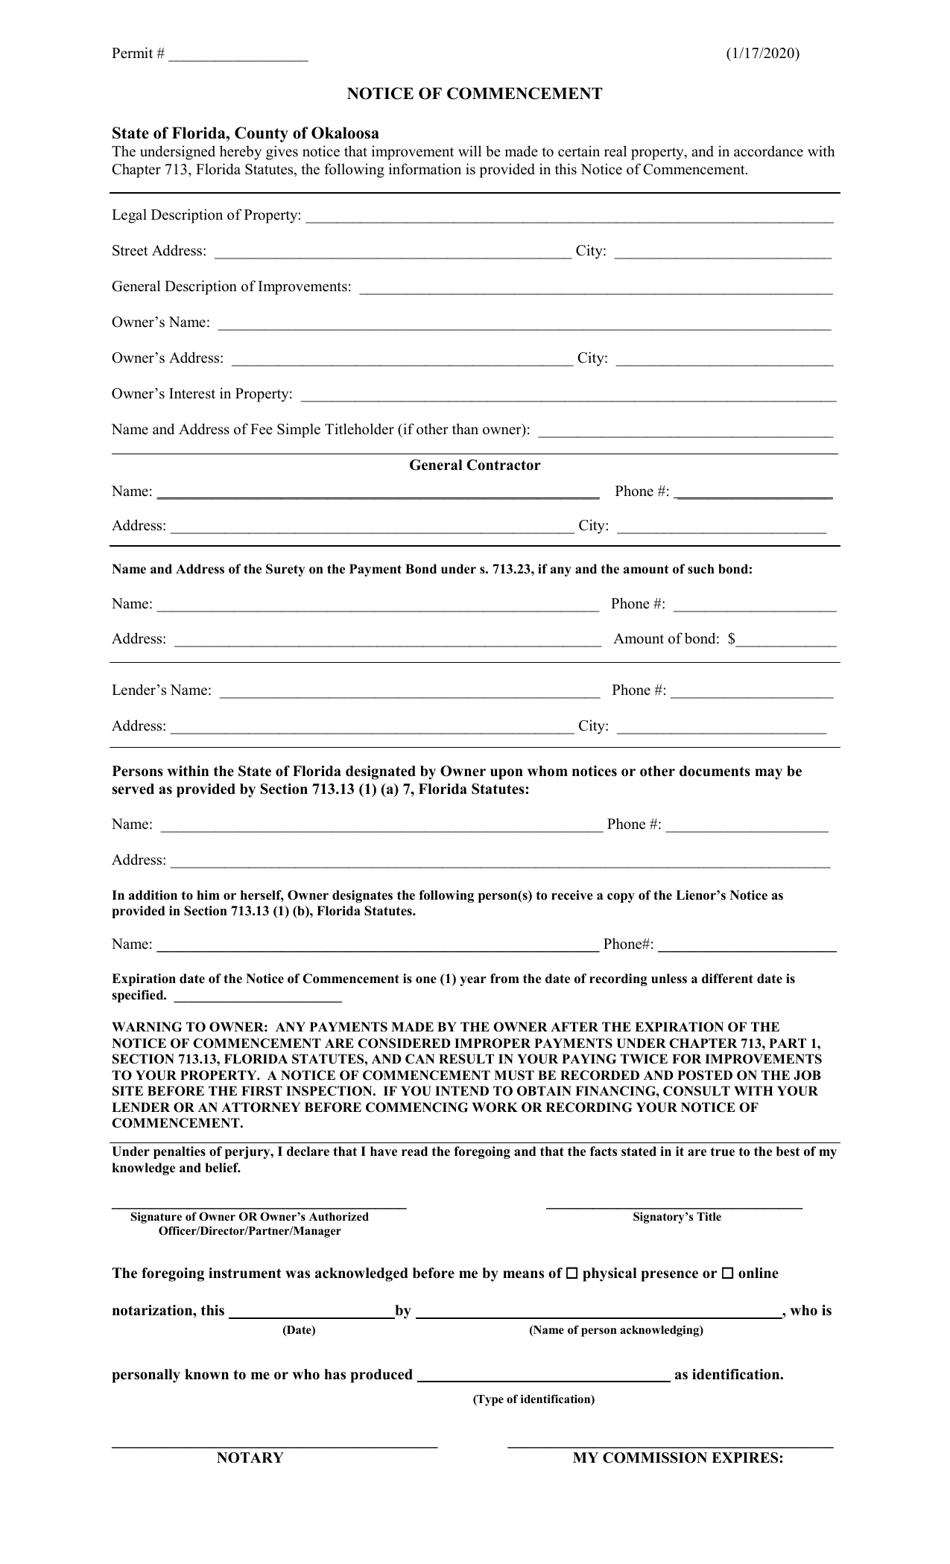 Okaloosa County, Florida Notice of Commencement Fill Out, Sign Online